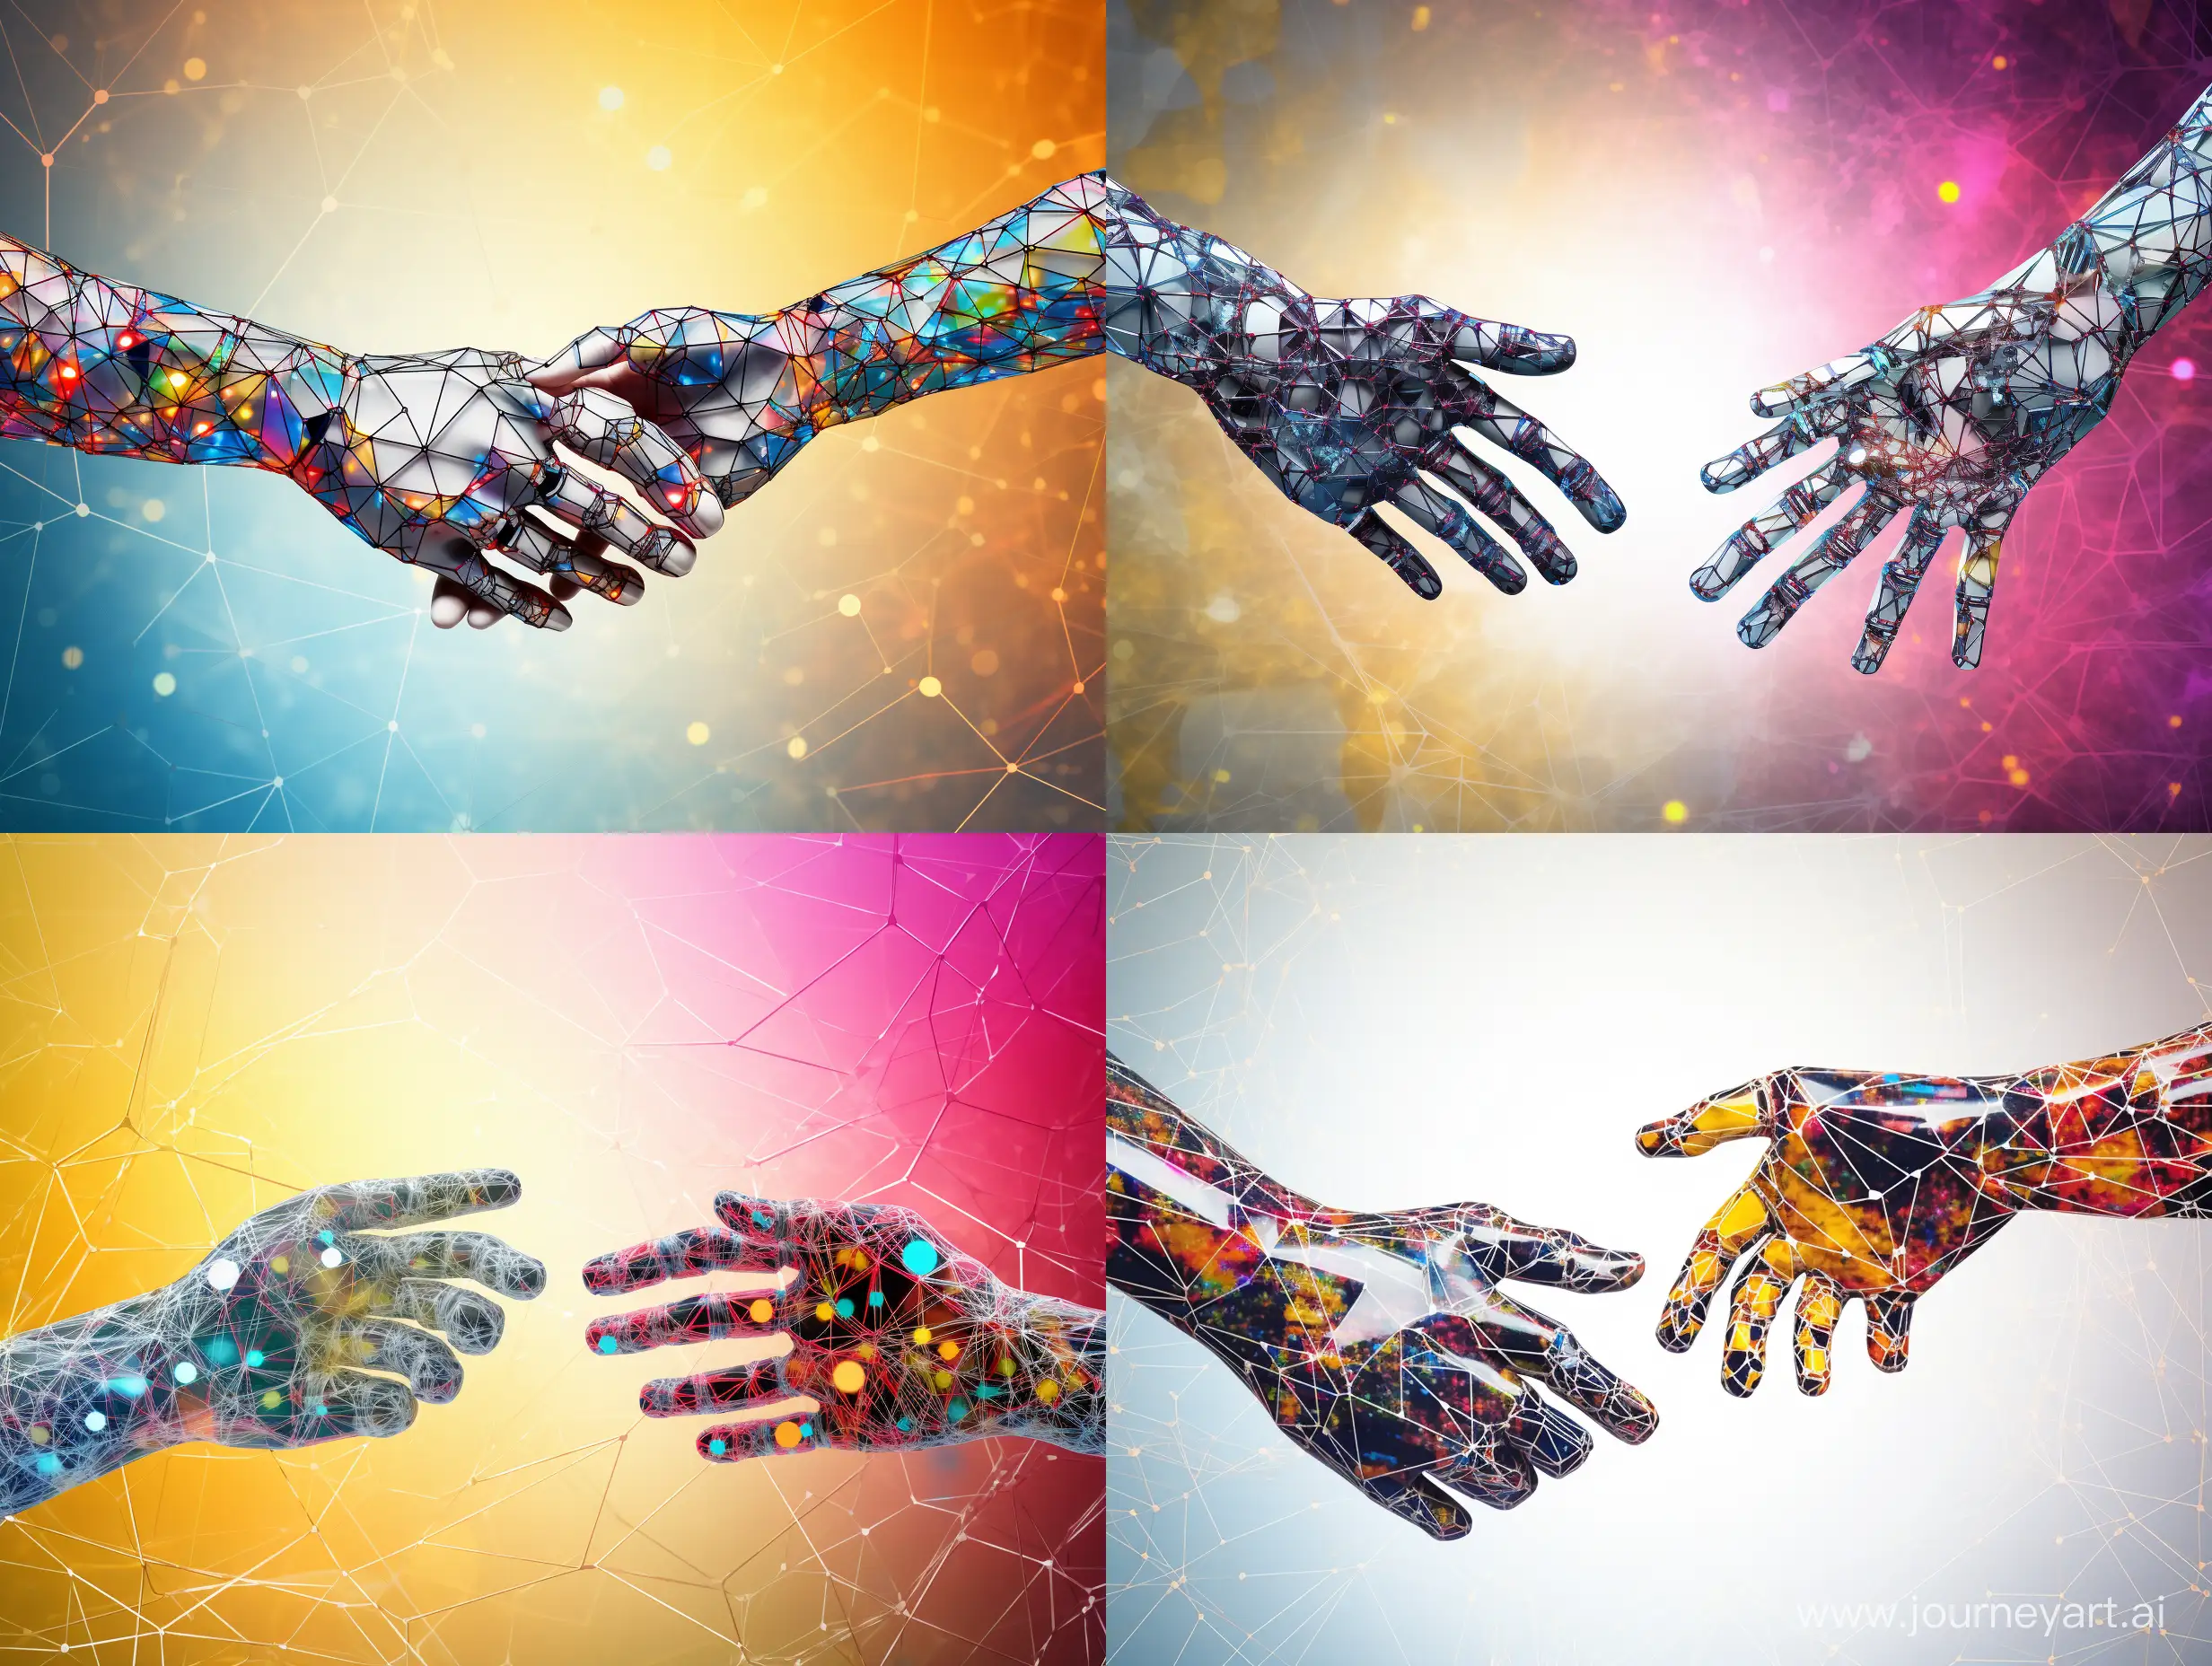 Bright and colorful background with two hands reaching out, one human hand and one robotic hand from a neural network, signifying collaboration, Symmetry, Impressionism, by Takeshi Murakami, High Key Lighting, colorful background, hands of human and robot, collaboration, Neural Network Collaboration --